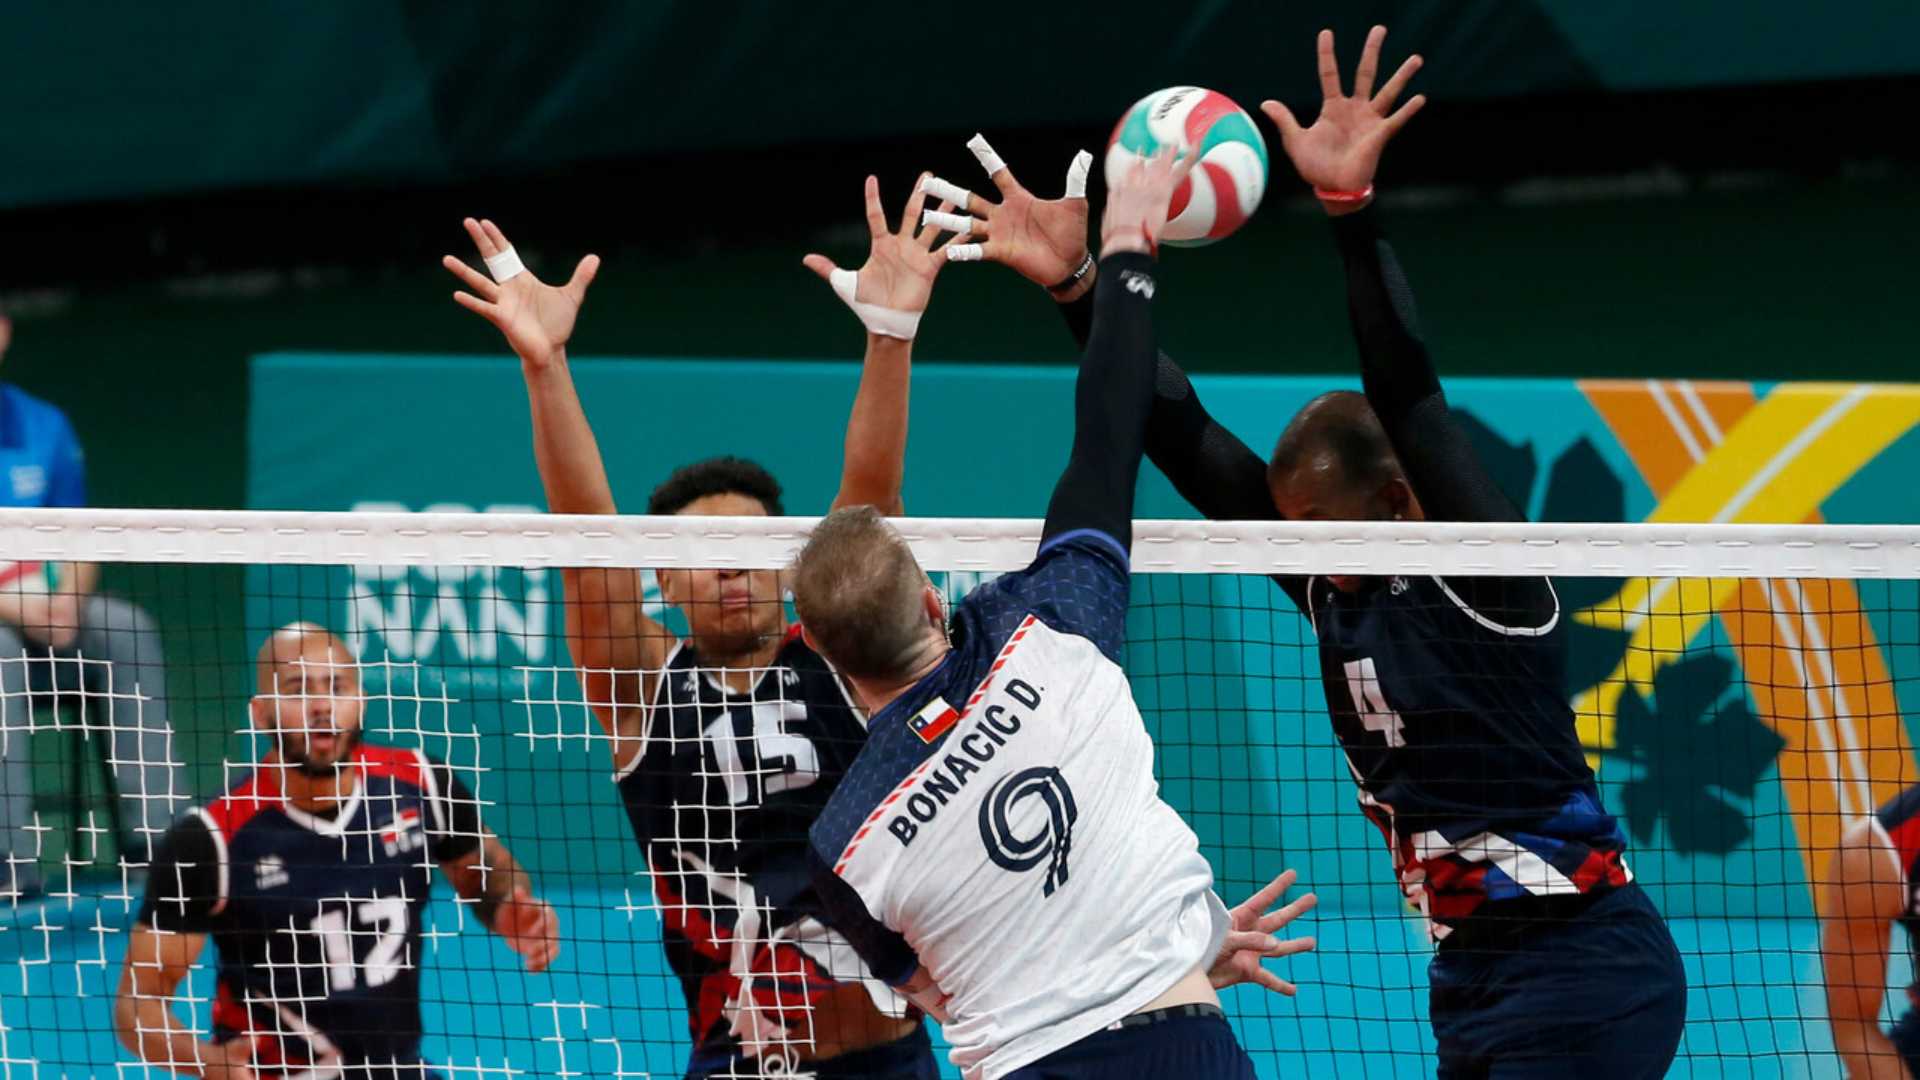 Chile achieved a hard-fought victory against the Dominican Republic in volleybal